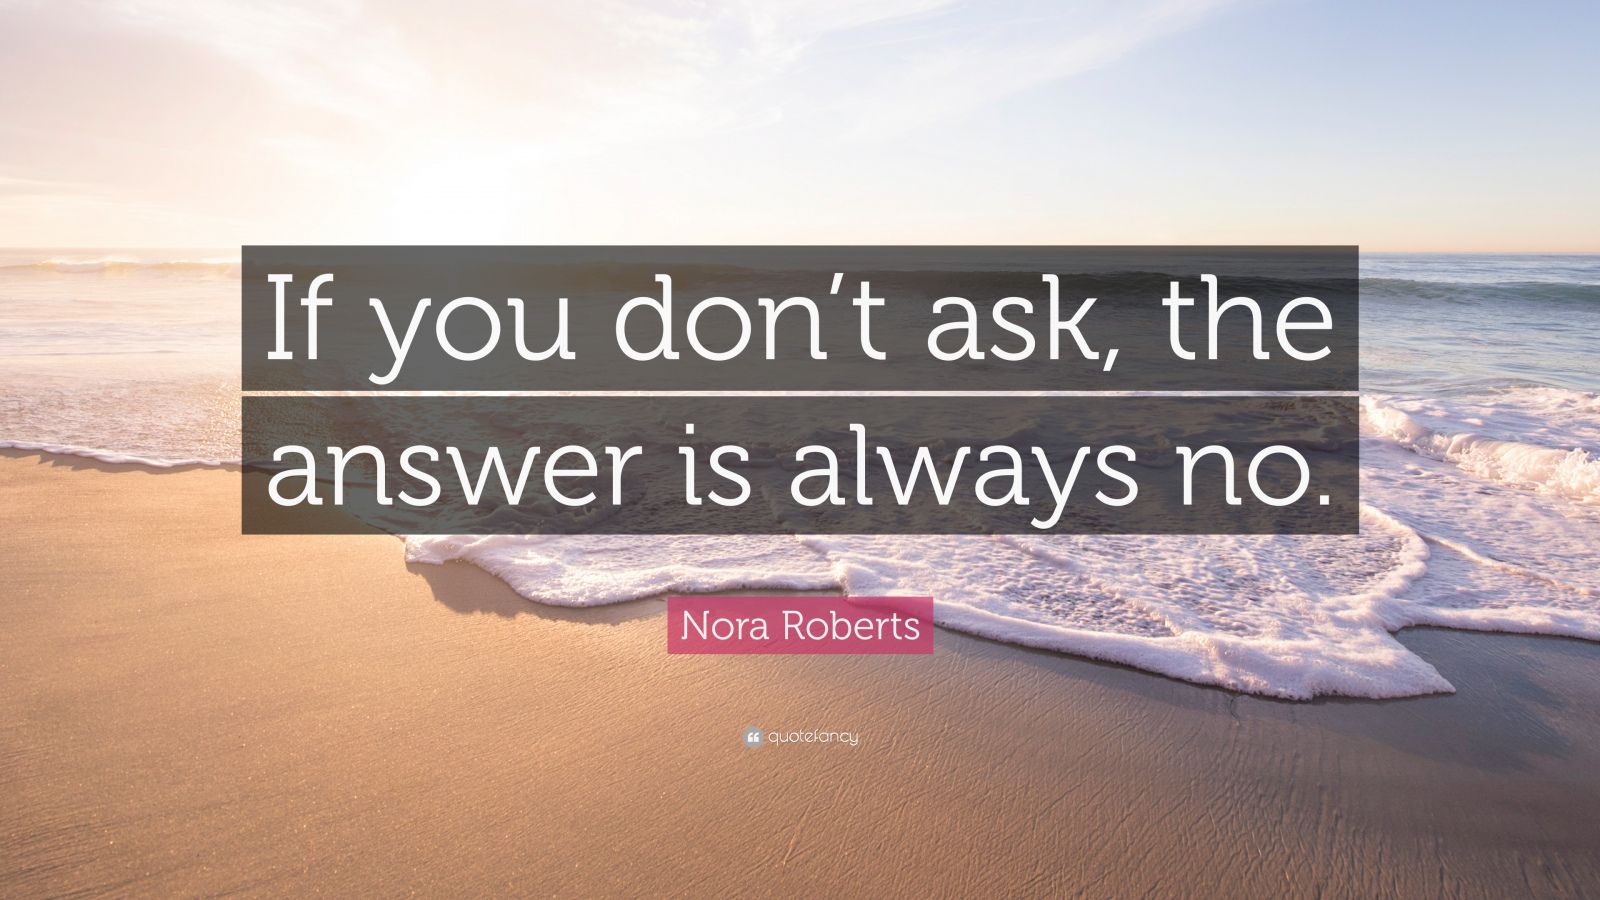 Nora Roberts Quote: “If you don’t ask, the answer is always no.” (33